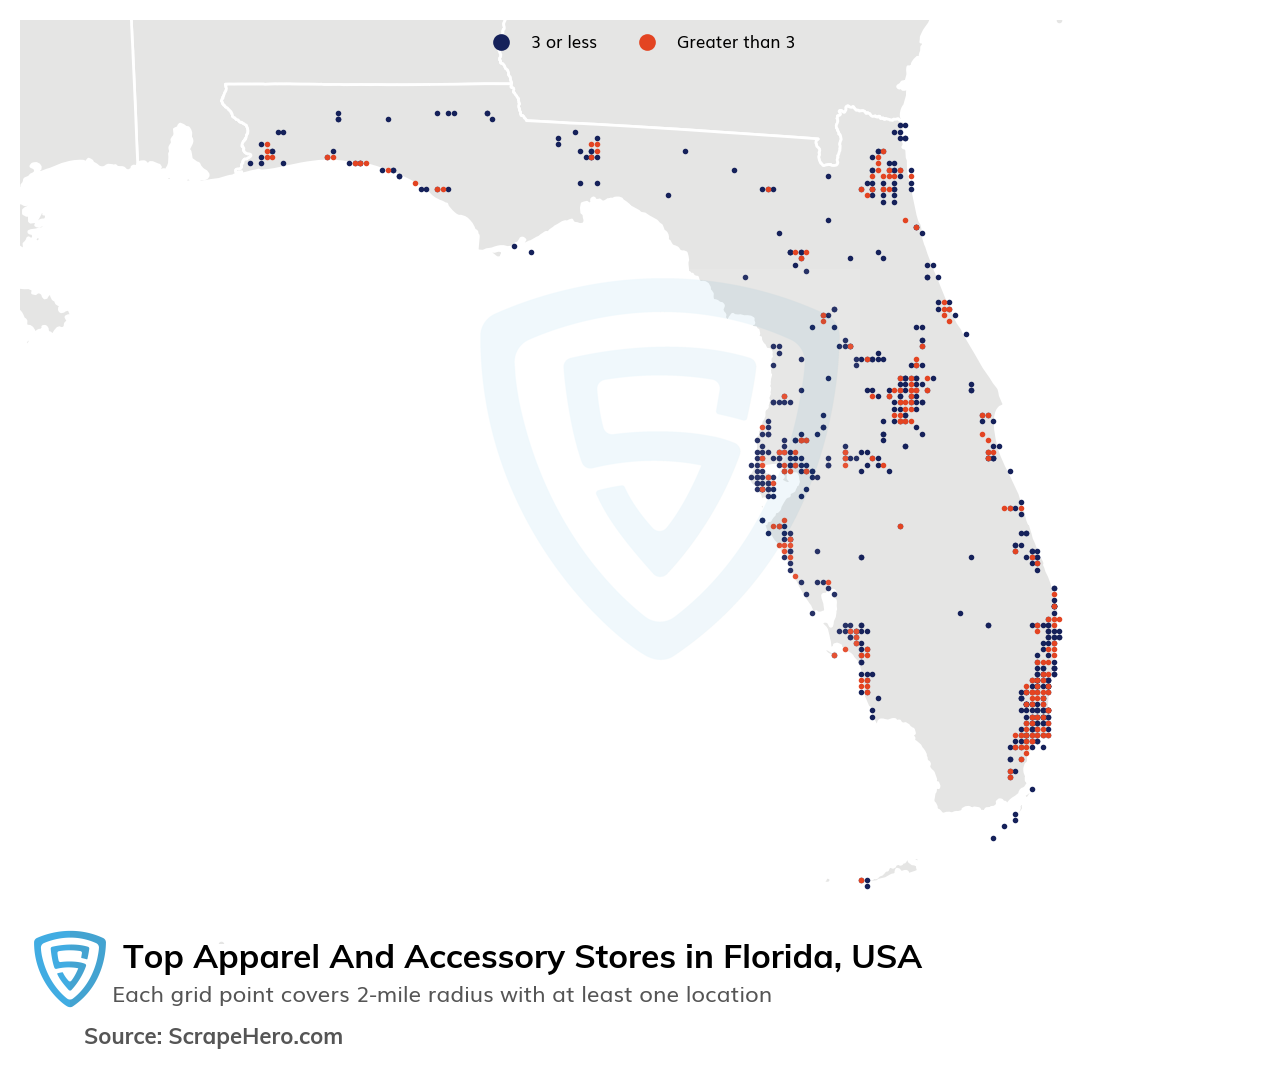 Map of 10 Largest Apparel & Accessory Stores in Florida in 2022 Based on Locations